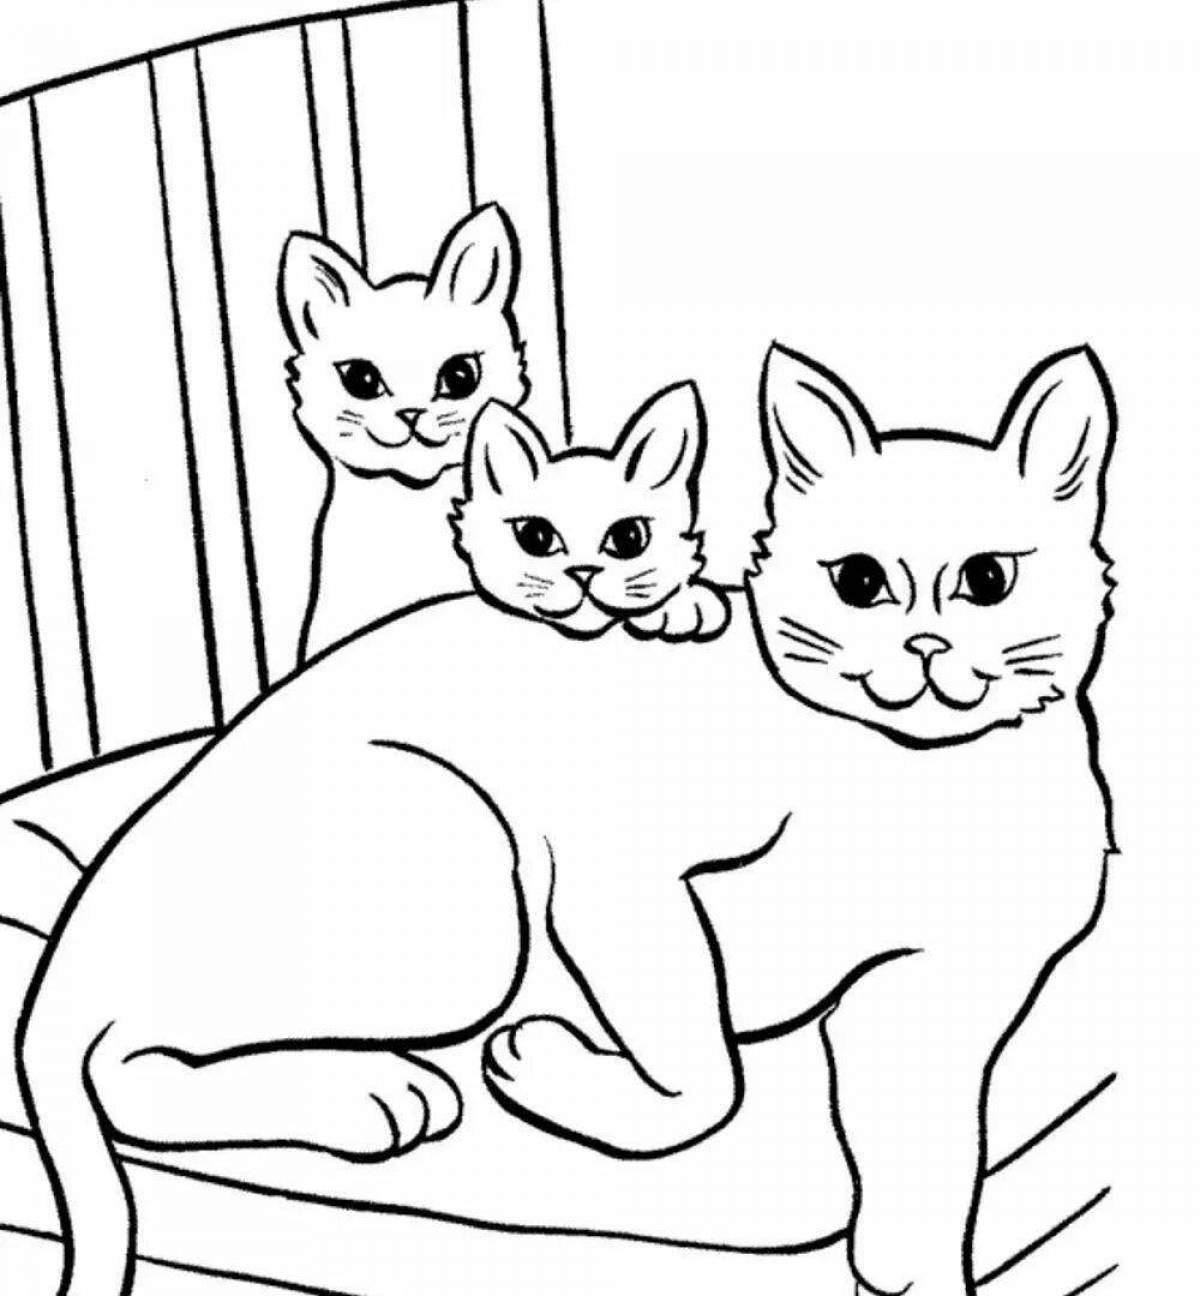 Friendly coloring cat with kittens